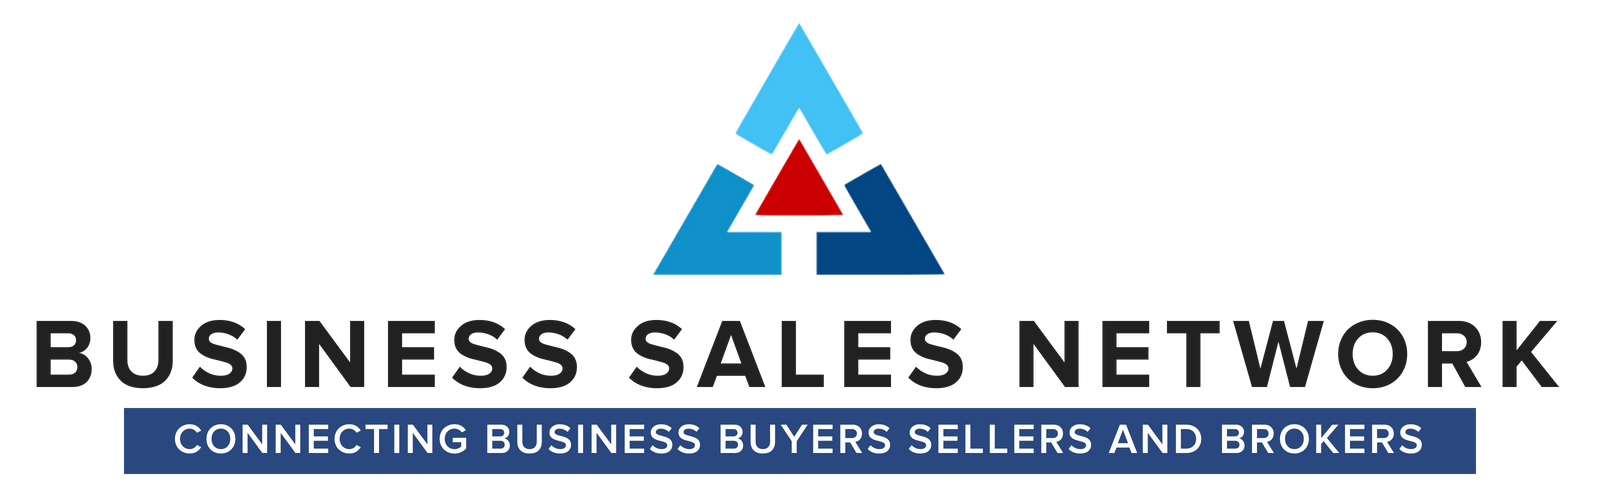 Business Sales Network